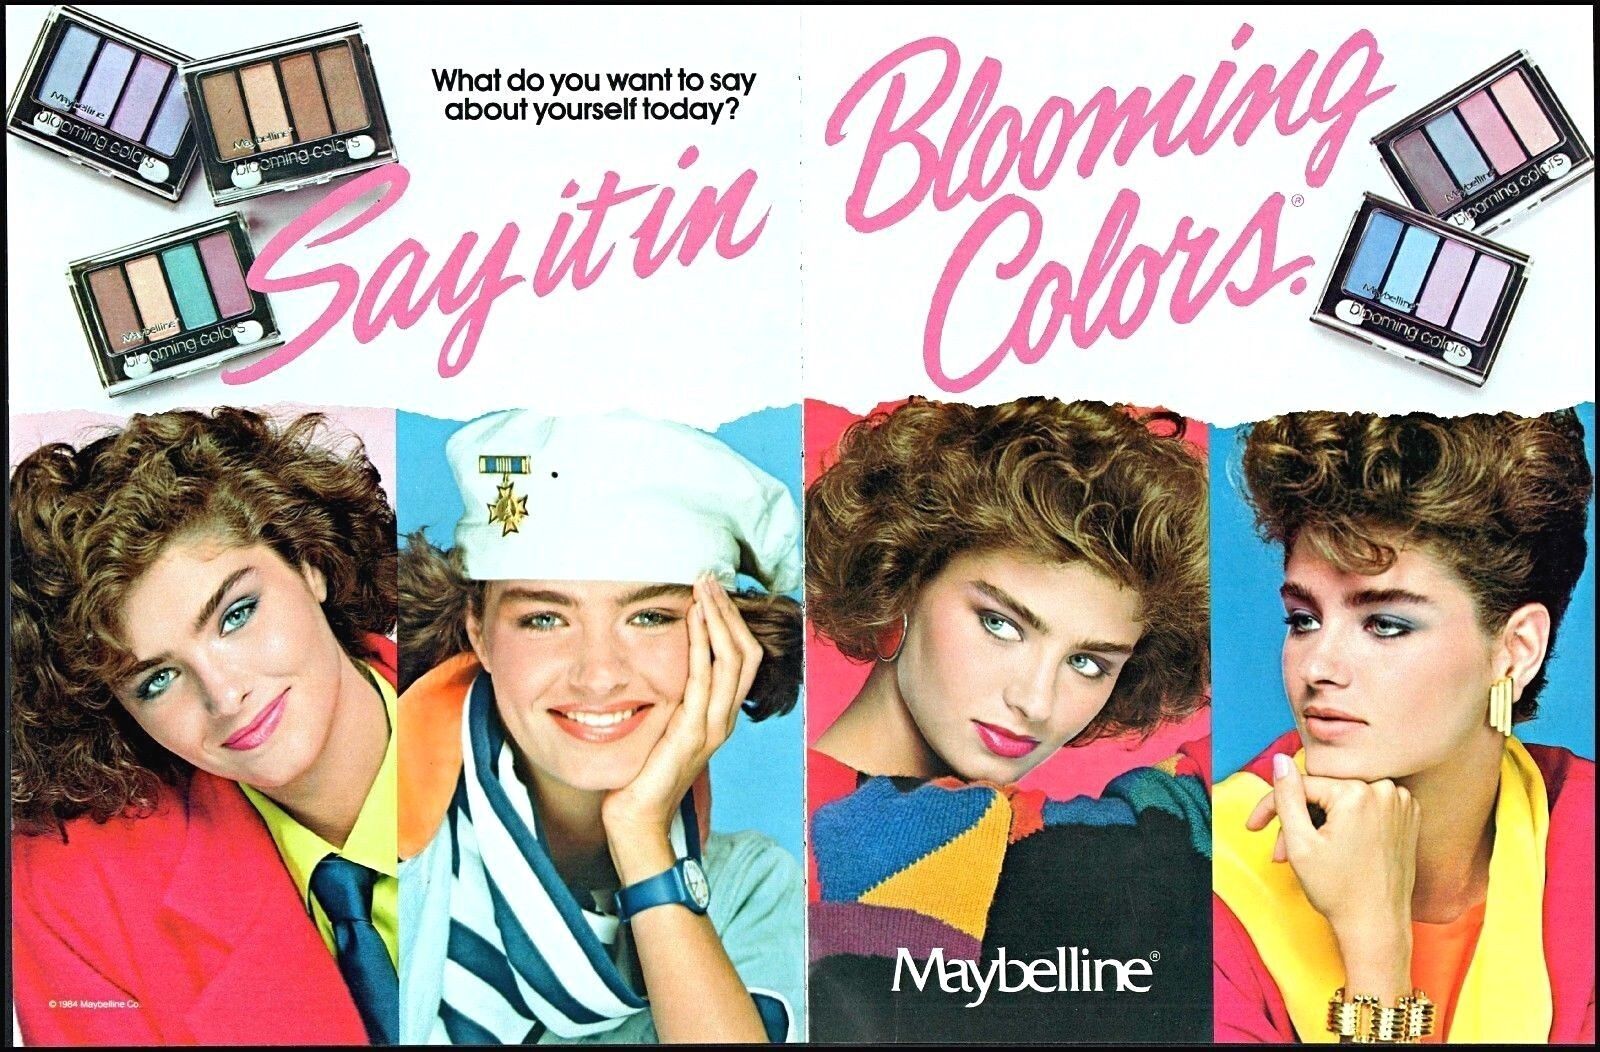 1985 Maybelline blooming colors make-up teen girls 4 photo Print Ad   ads17